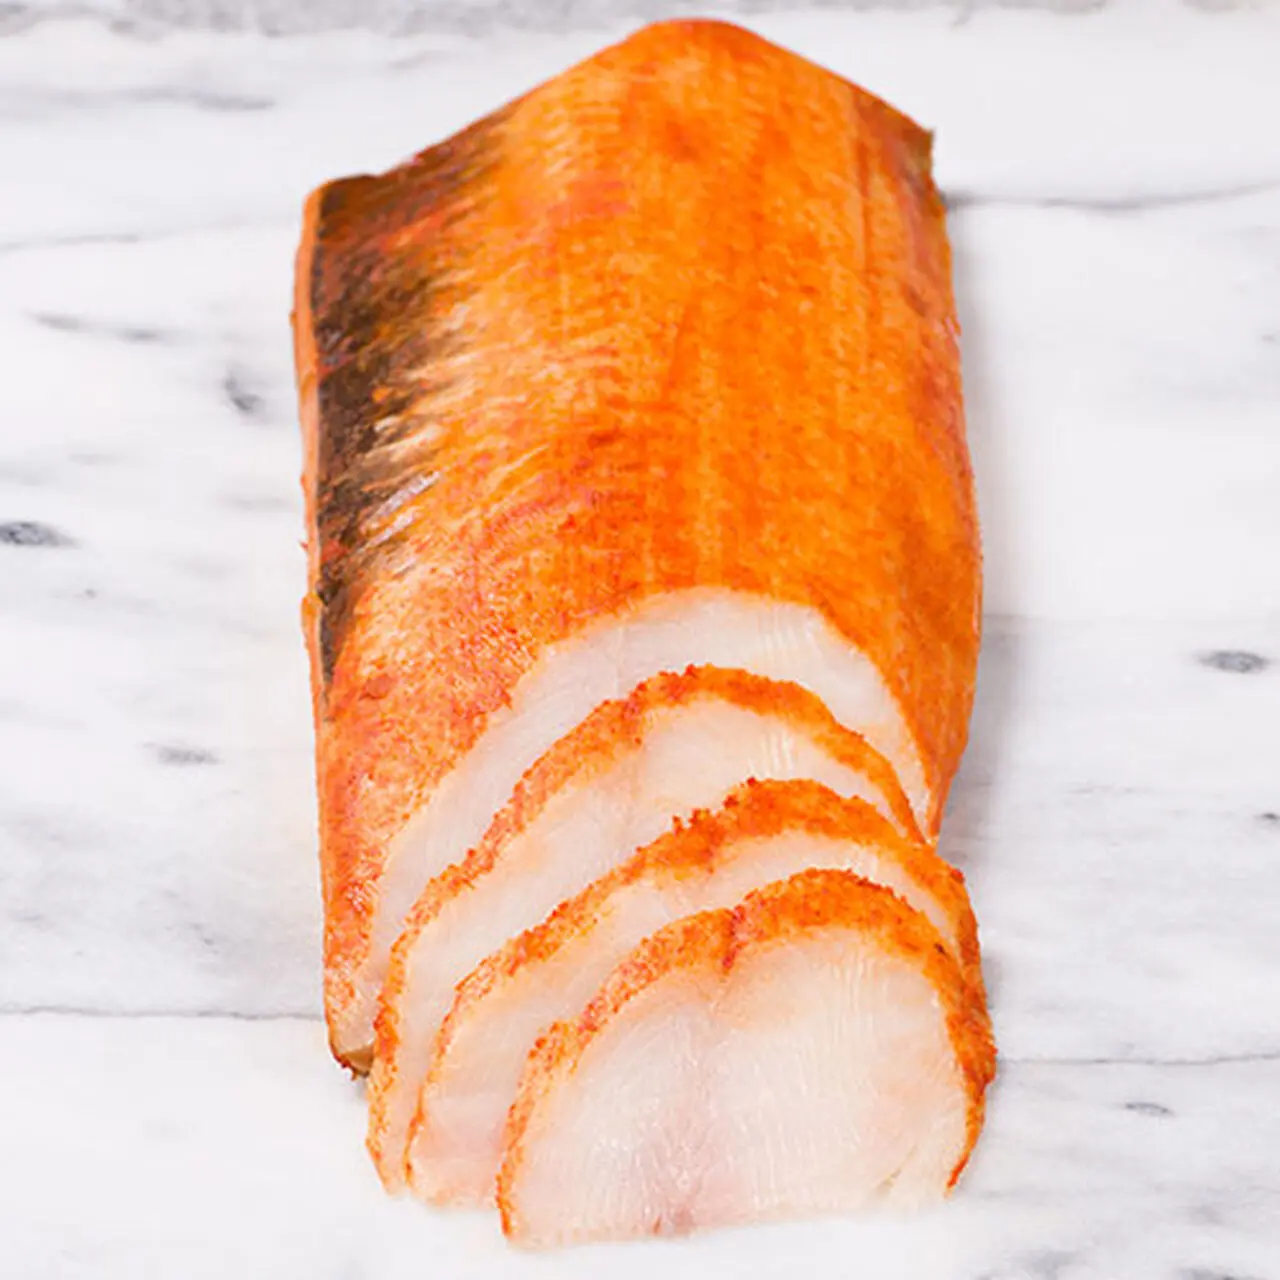 smoked sable - What does a sablefish taste like